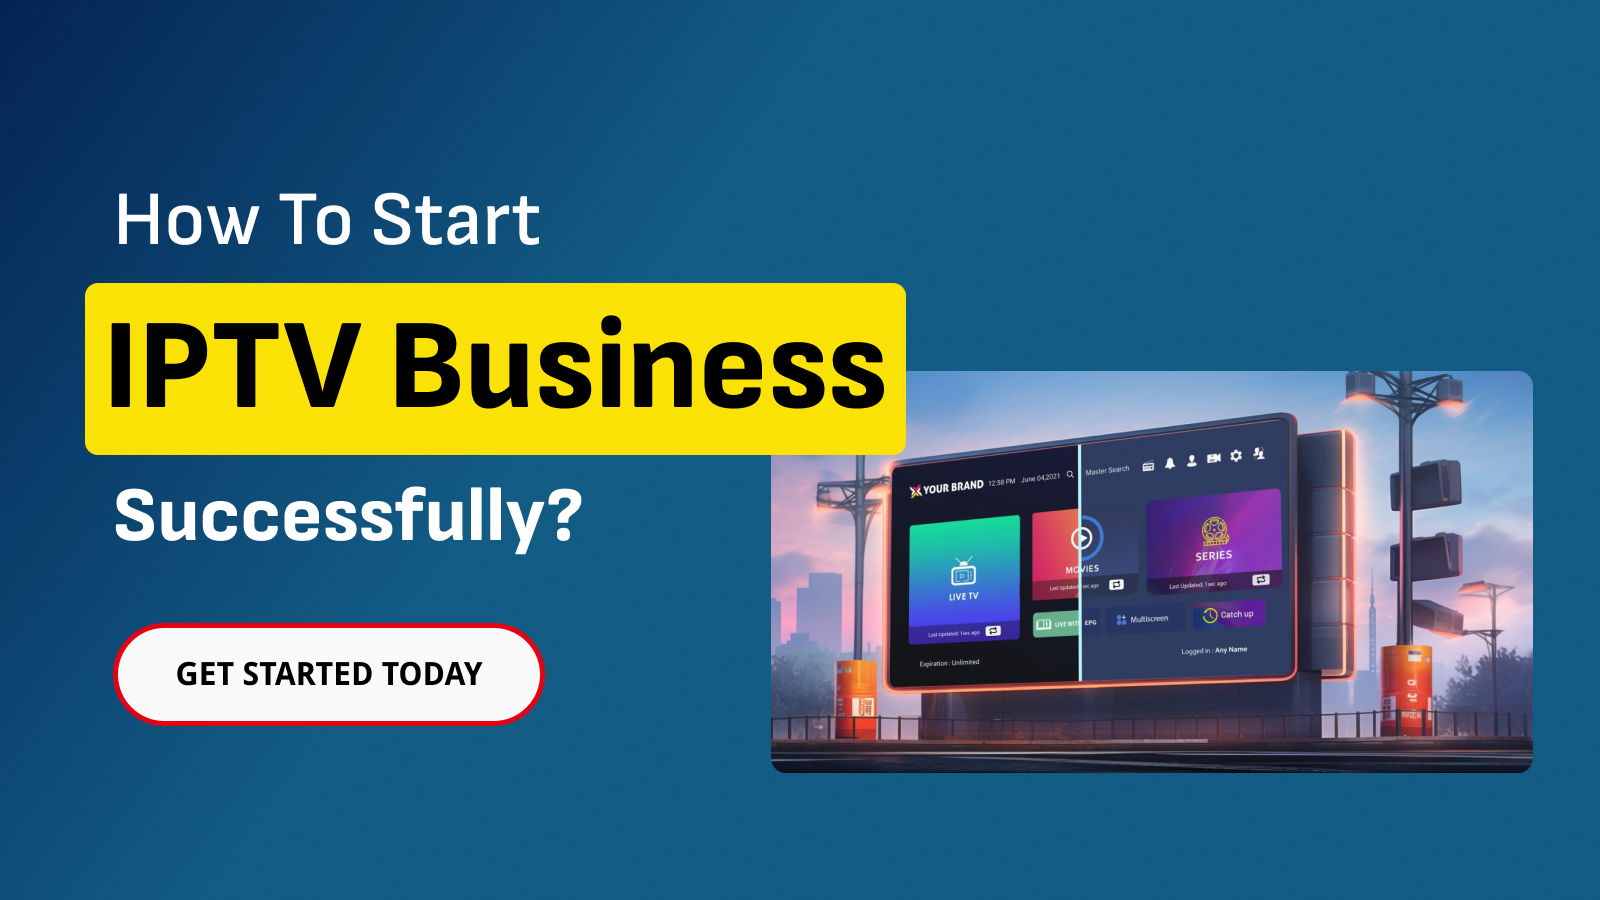 How to Start an IPTV Business Successfully?